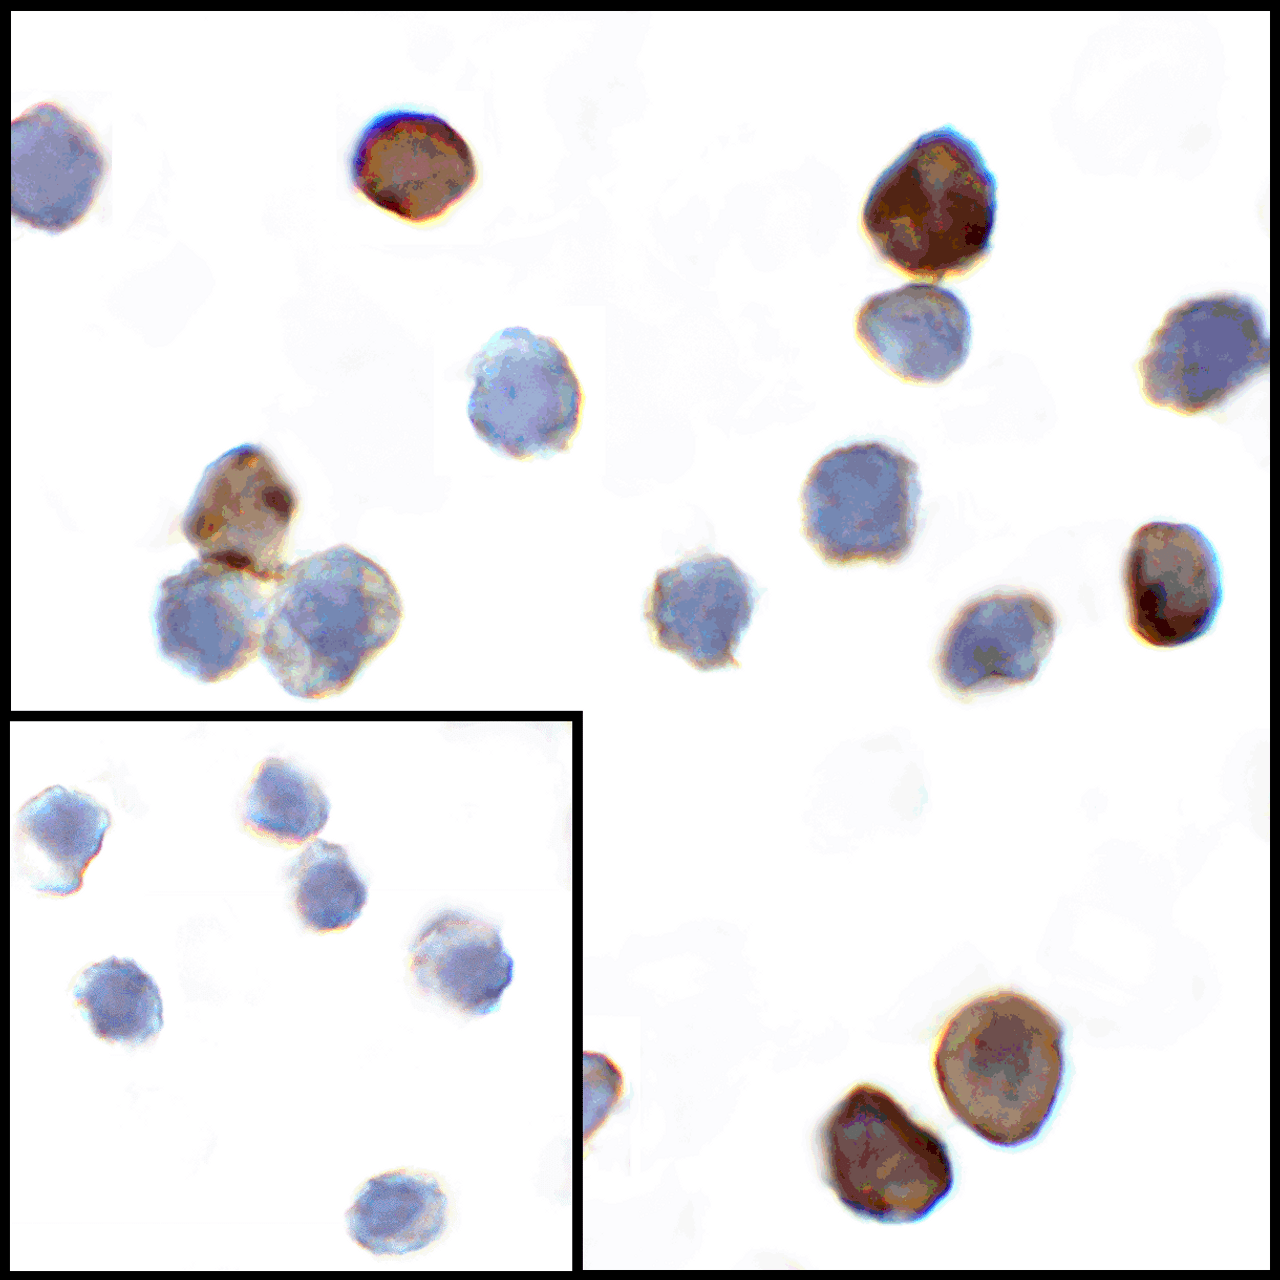 Immunocytochemistry of VISTA in transfected HEK293 cells with VISTA antibody at 1 ug/mL. Lower left: Immunocytochemistry in transfected HEK293 cells with control mouse IgG antibody at 1 ug/mL.